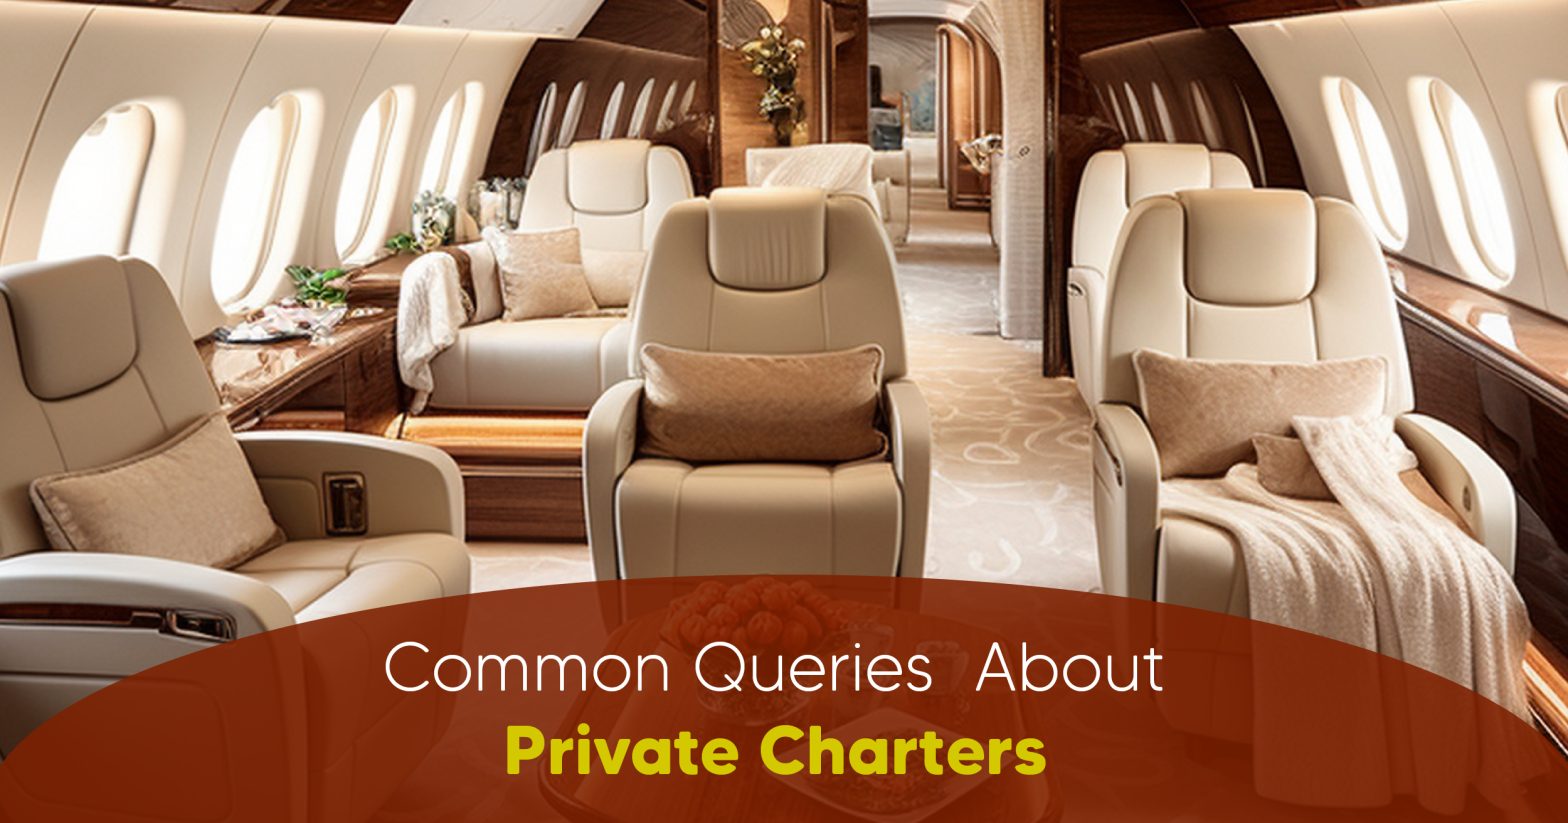 Common Queries About Private Charters